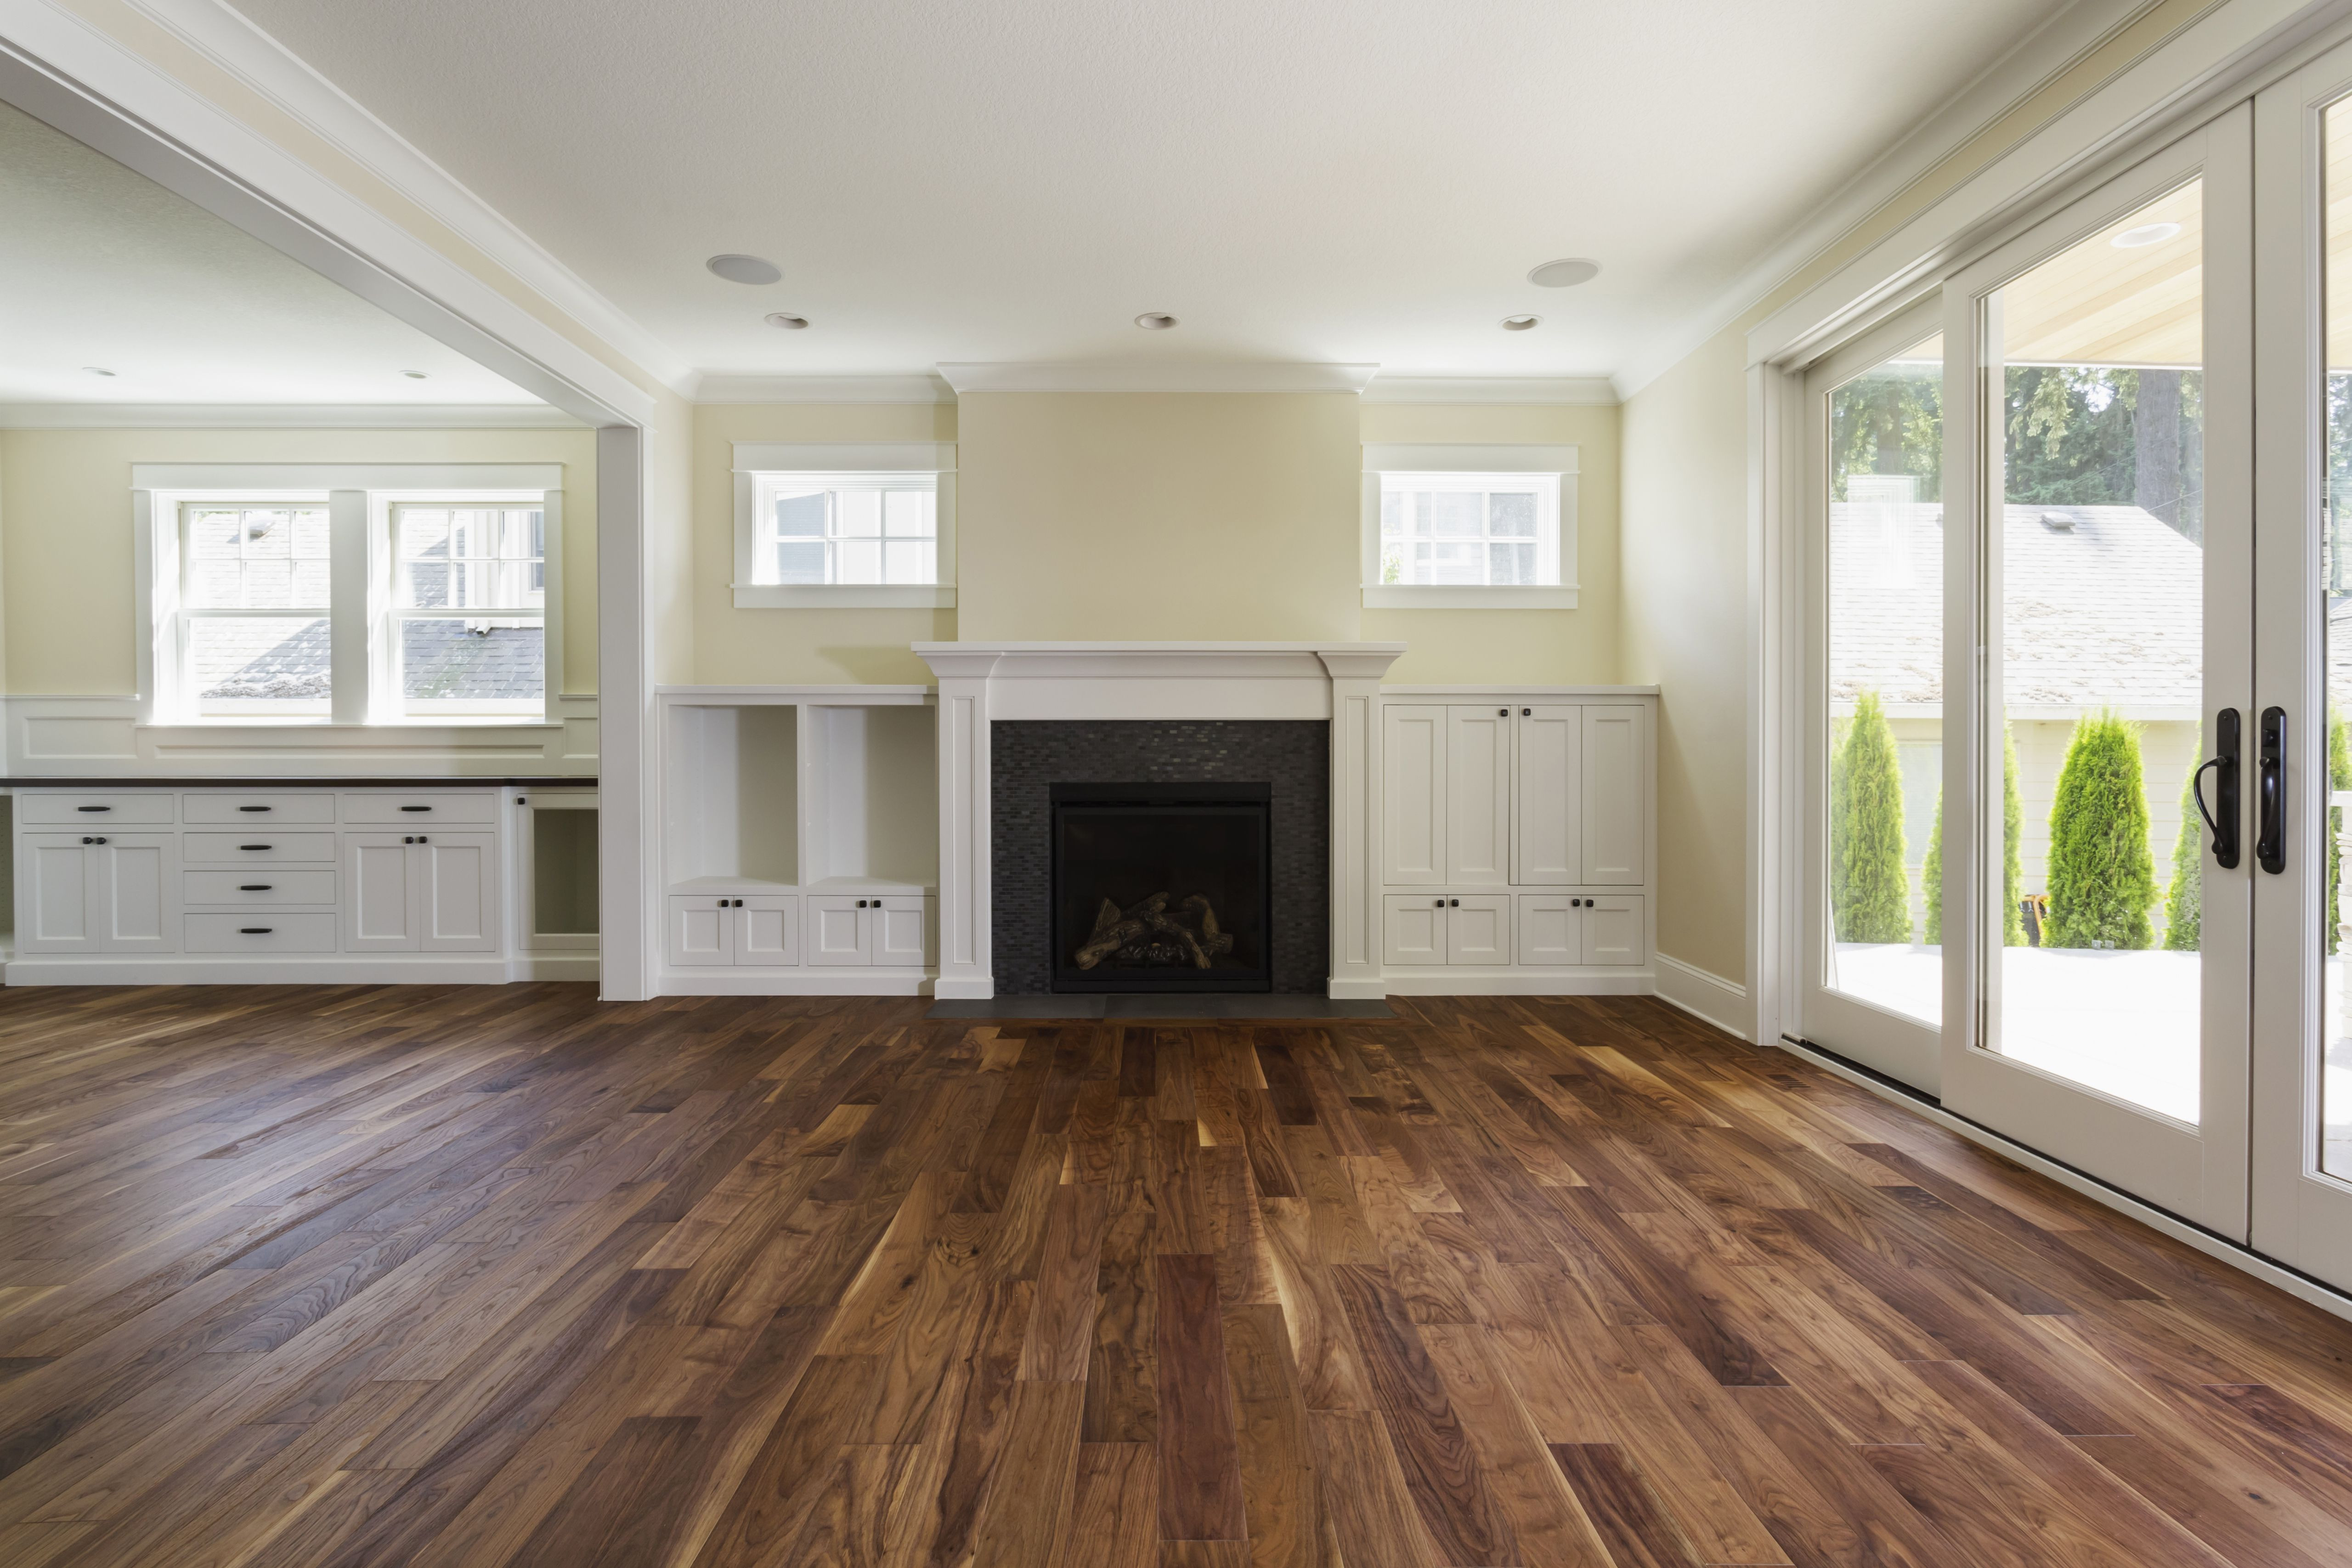 10 attractive Cost to Restore Hardwood Floors 2024 free download cost to restore hardwood floors of the pros and cons of prefinished hardwood flooring intended for fireplace and built in shelves in living room 482143011 57bef8e33df78cc16e035397